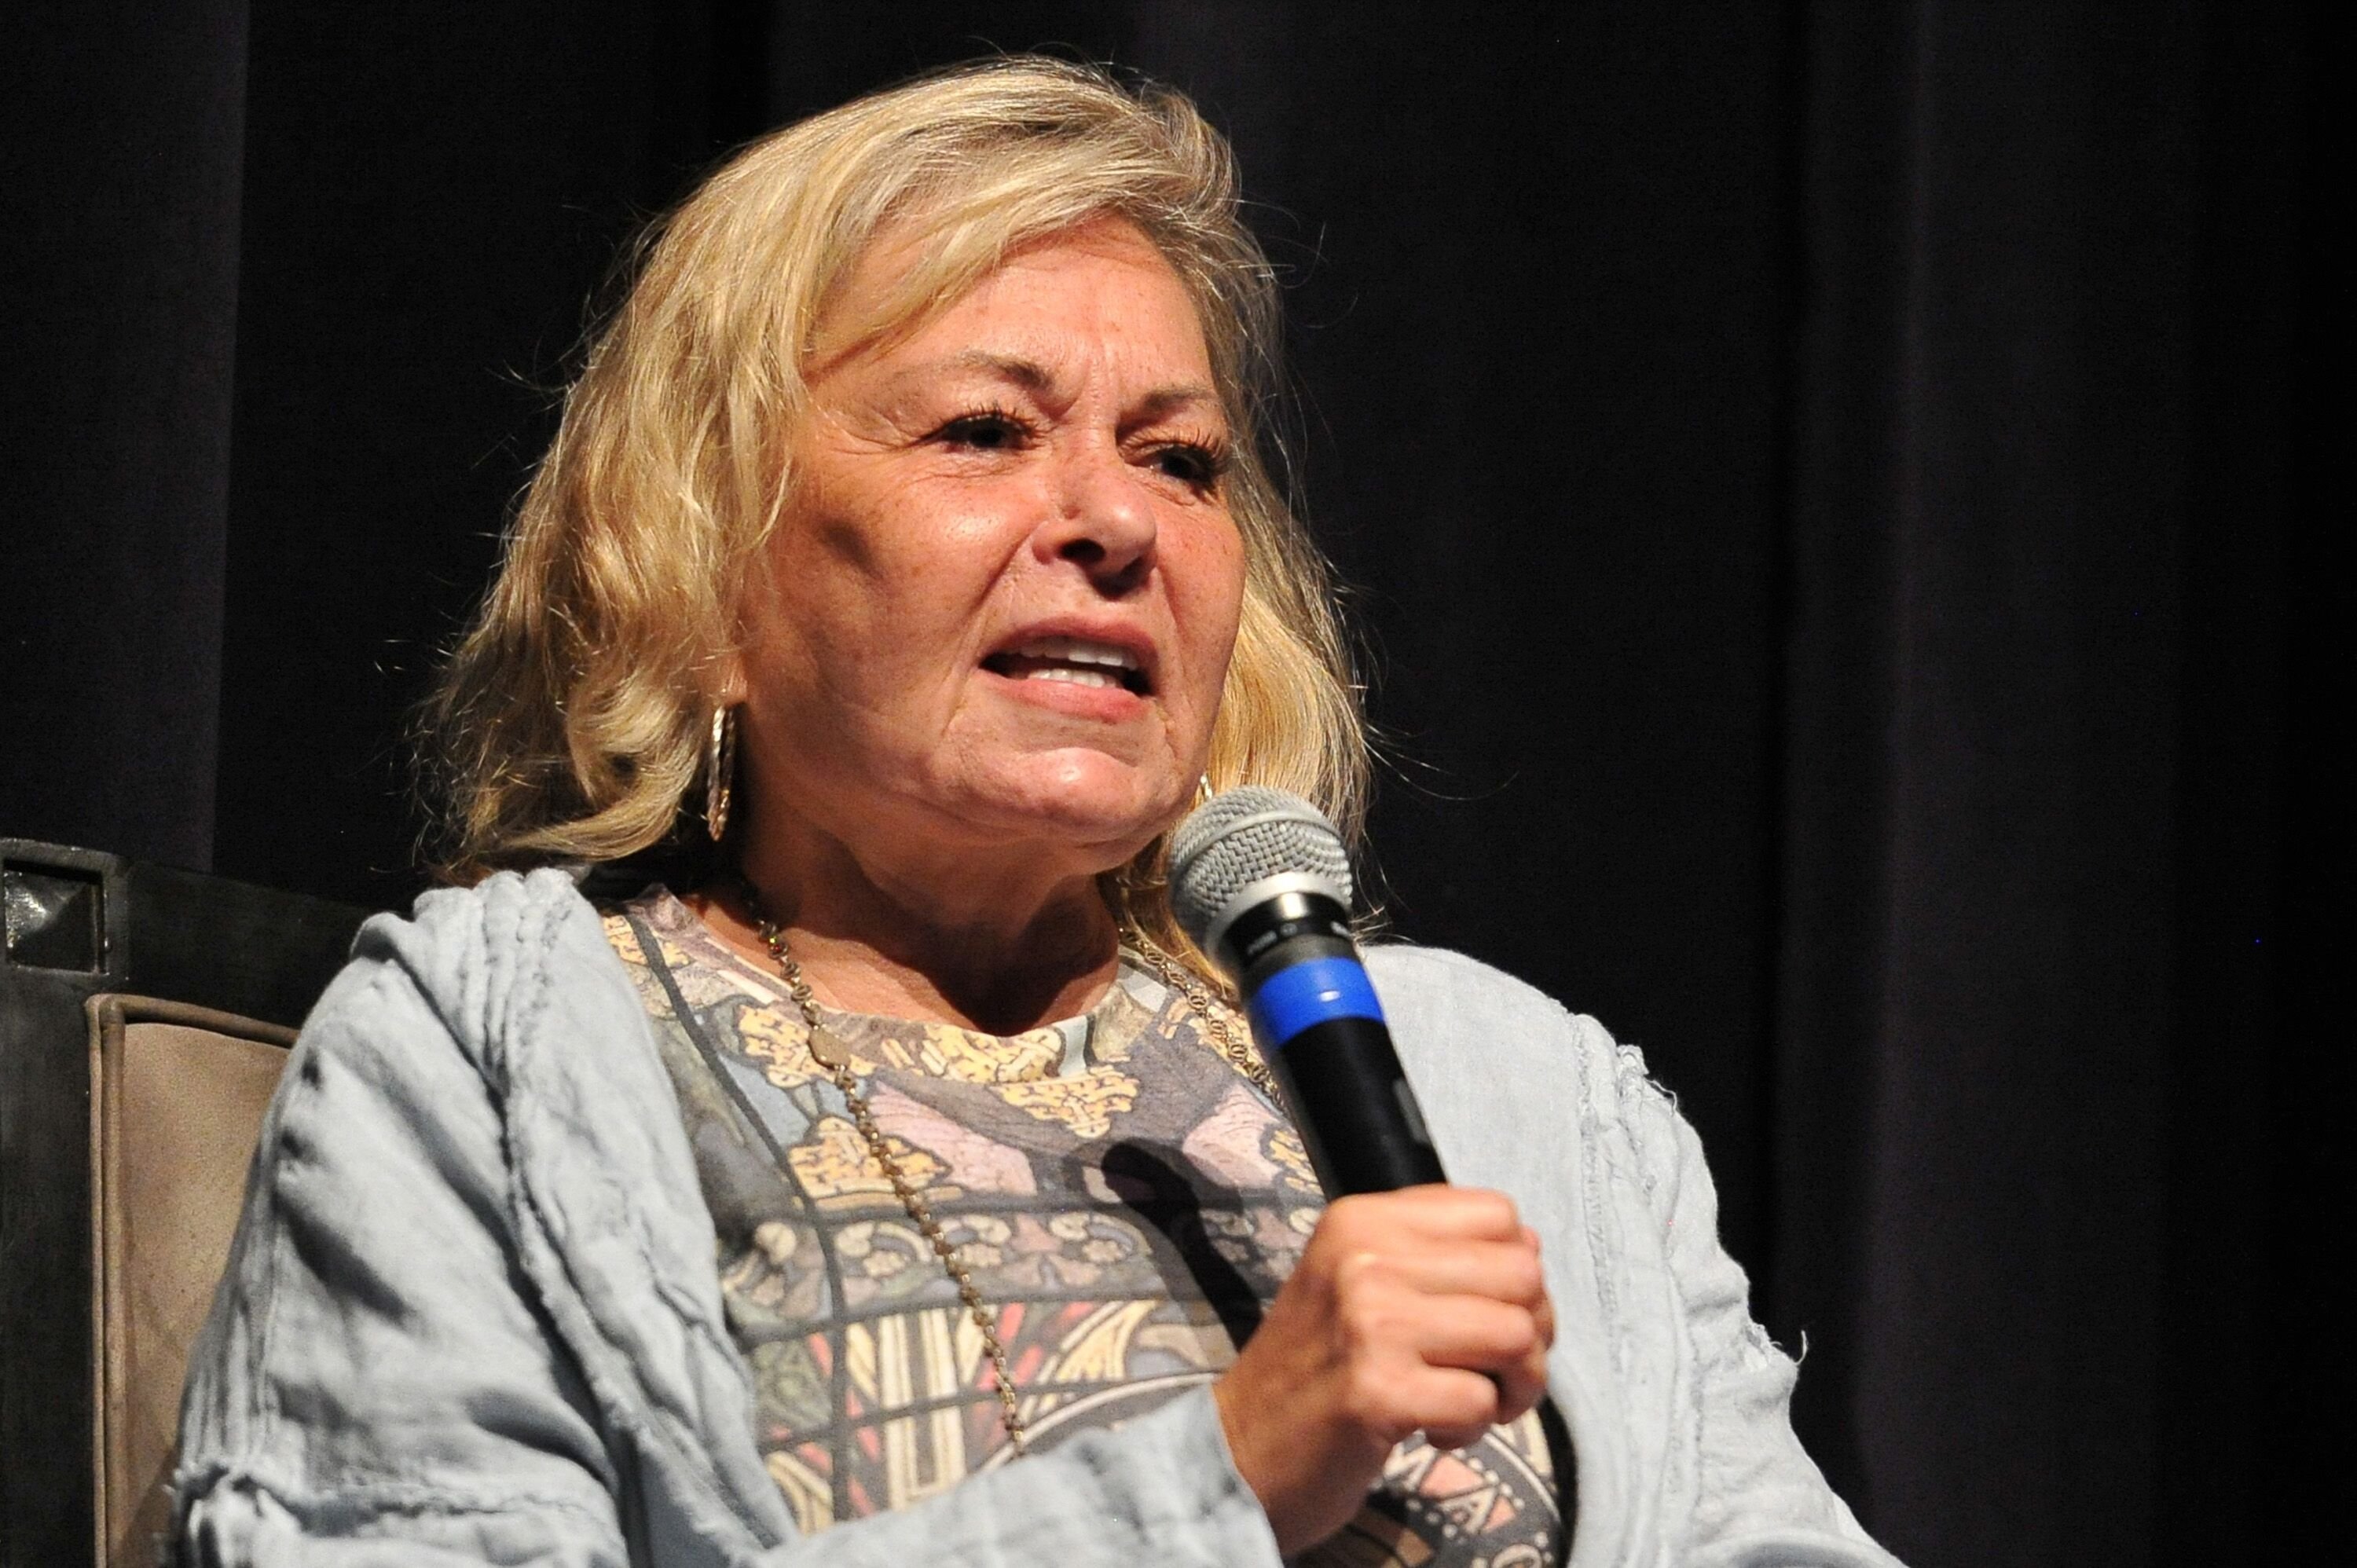 Roseanne Barr participates in "Is America a Forgiving Nation?,'' a Yom Kippur eve talk on forgiveness hosted by the World Values Network and the Jewish Journal at Saban Theatre on September 17, 2018 in Beverly Hills, California | Photo: Getty Images